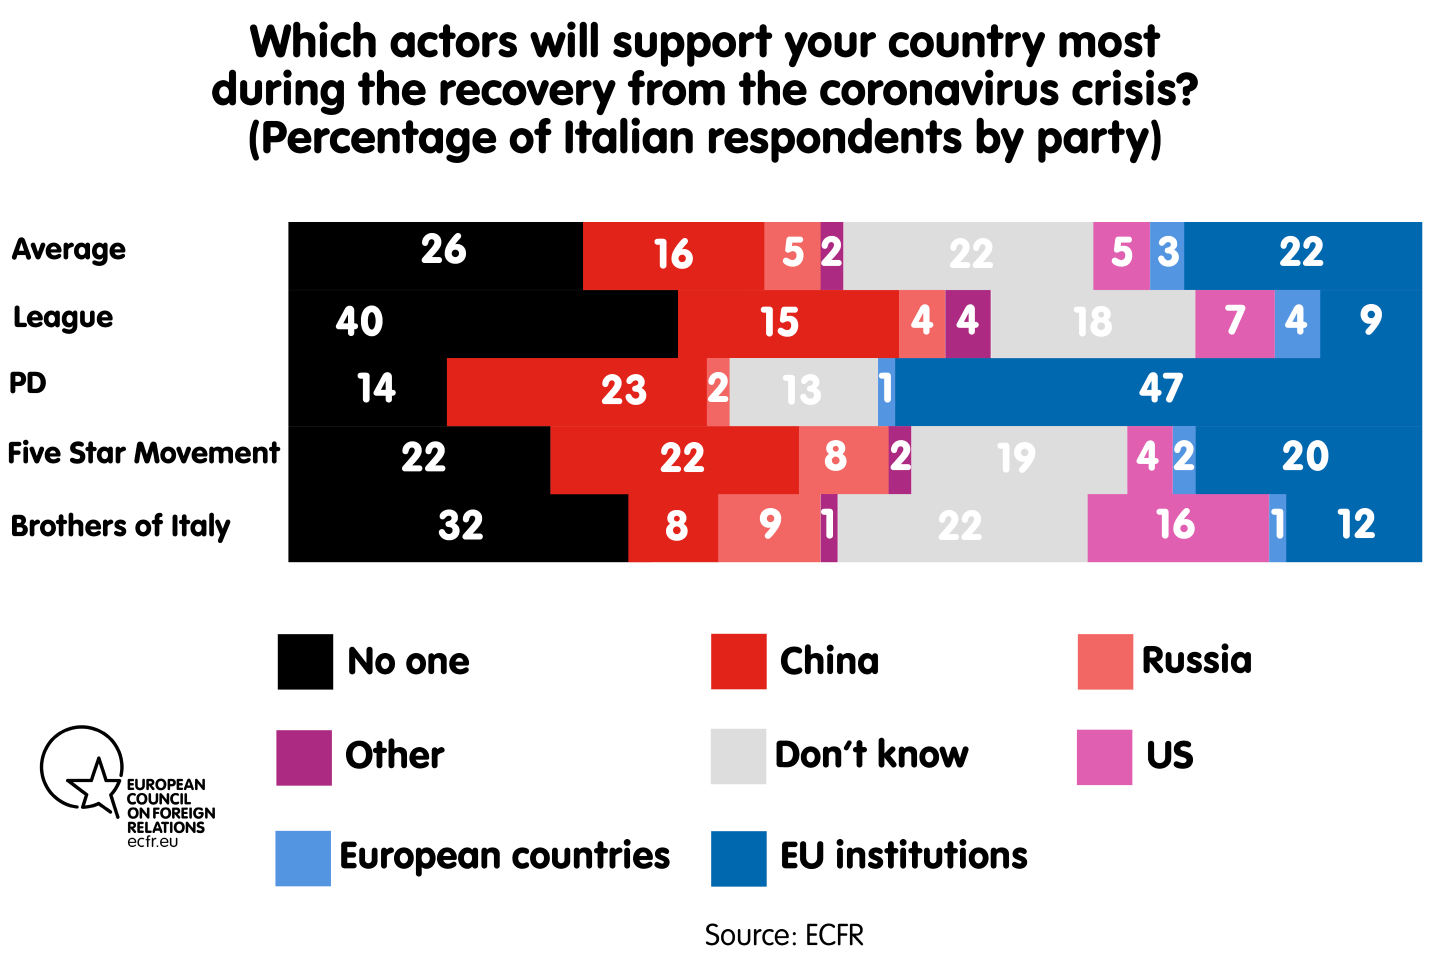 Which actors will support your country most during the recovery from the coronavirus crisis? By party